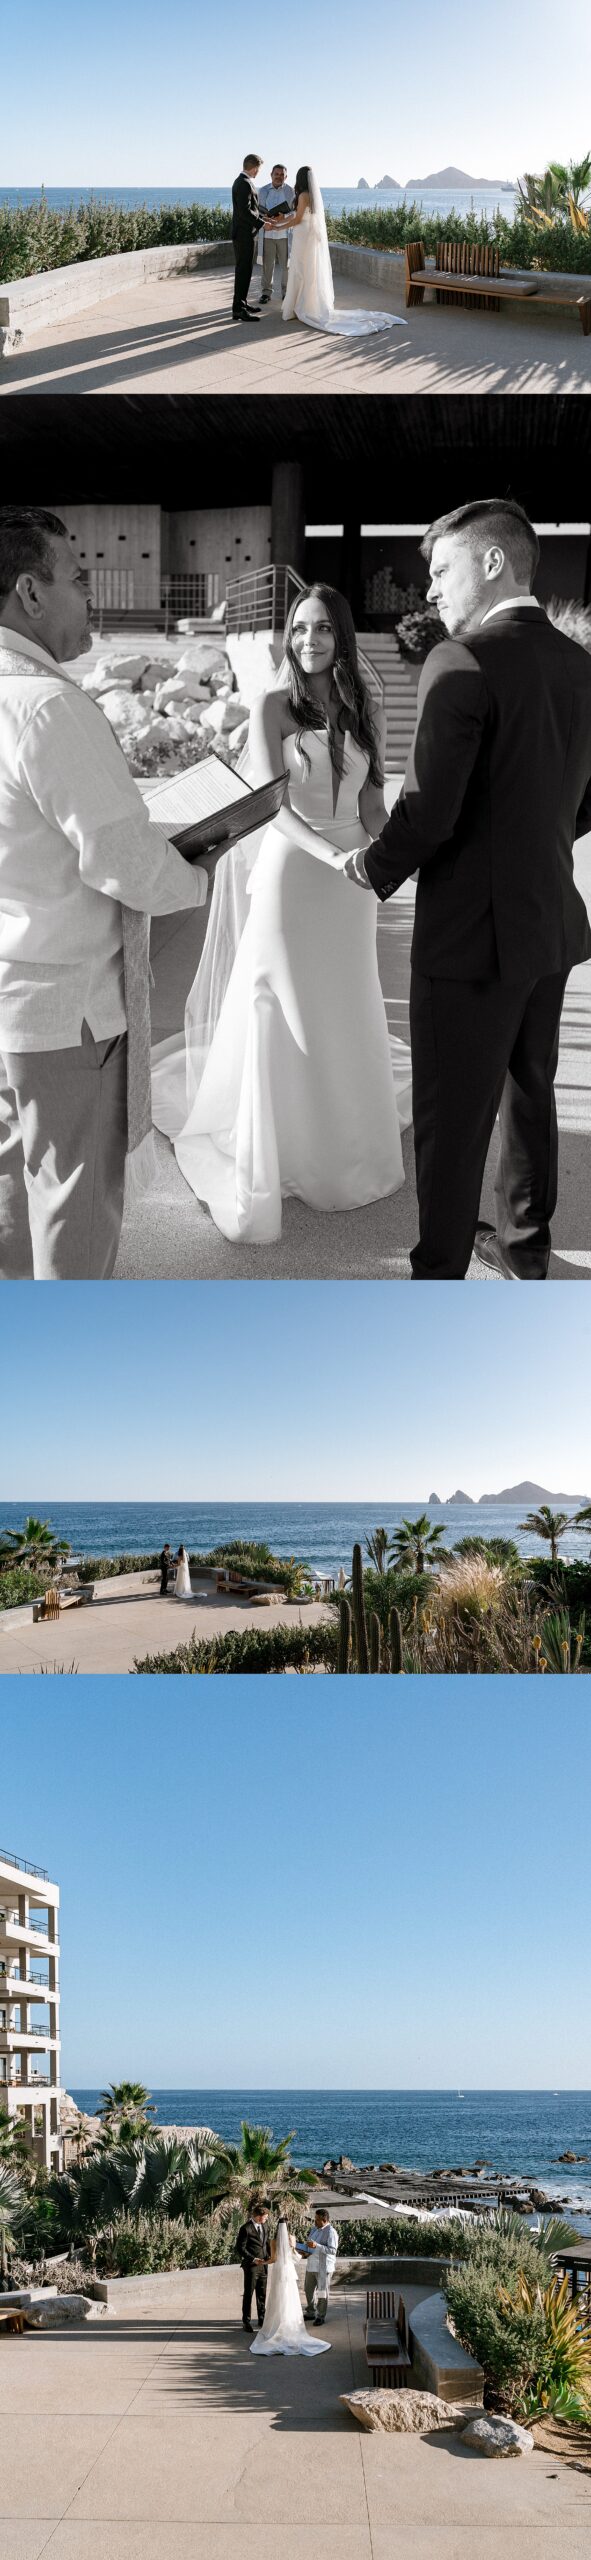 Bride and groom Ceremony Wedding The Cape Hotel Cabo San Lucas